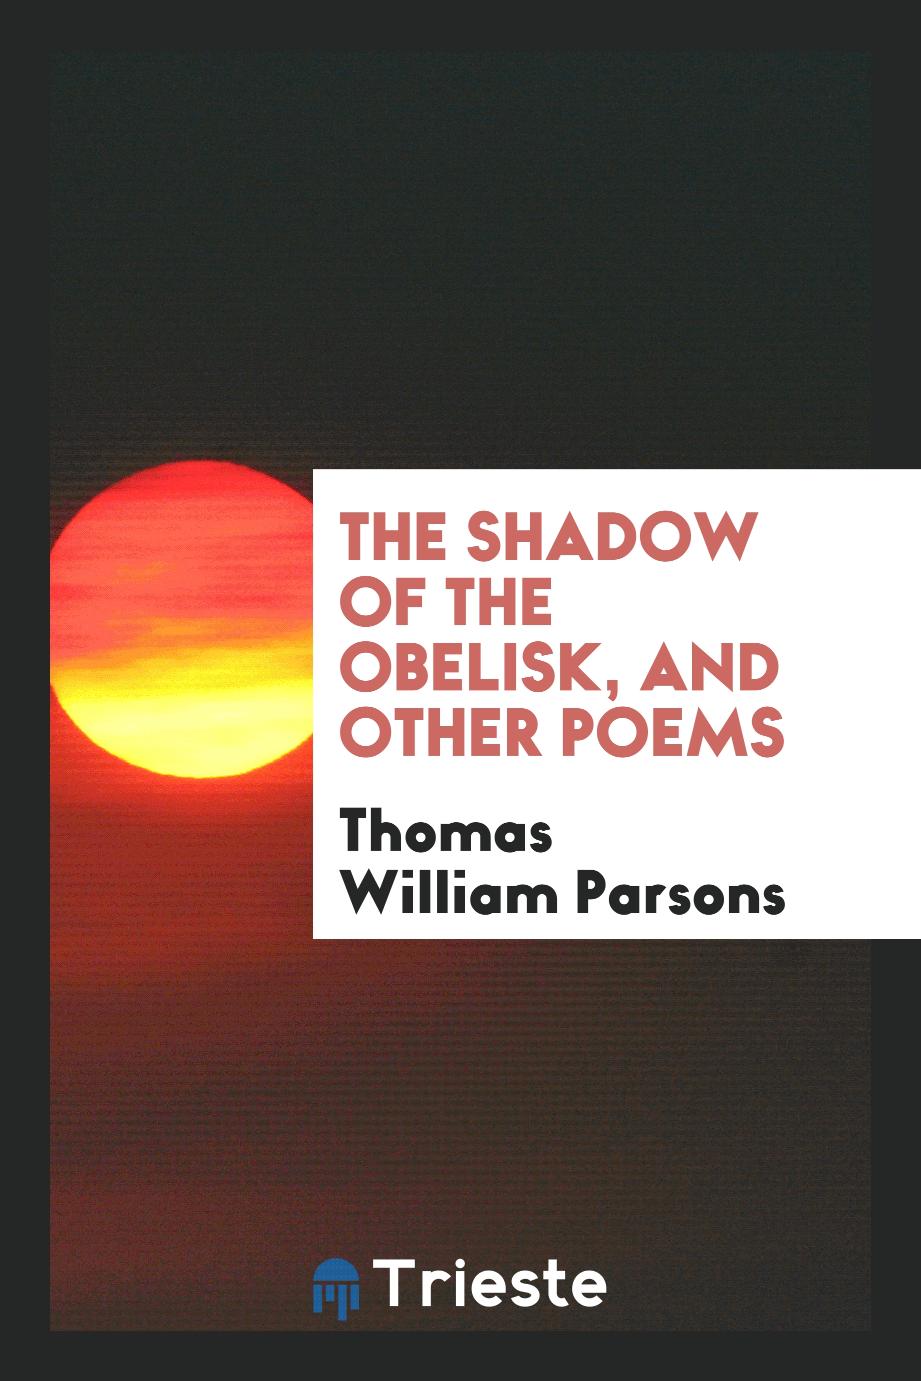 The Shadow of the Obelisk, and Other Poems